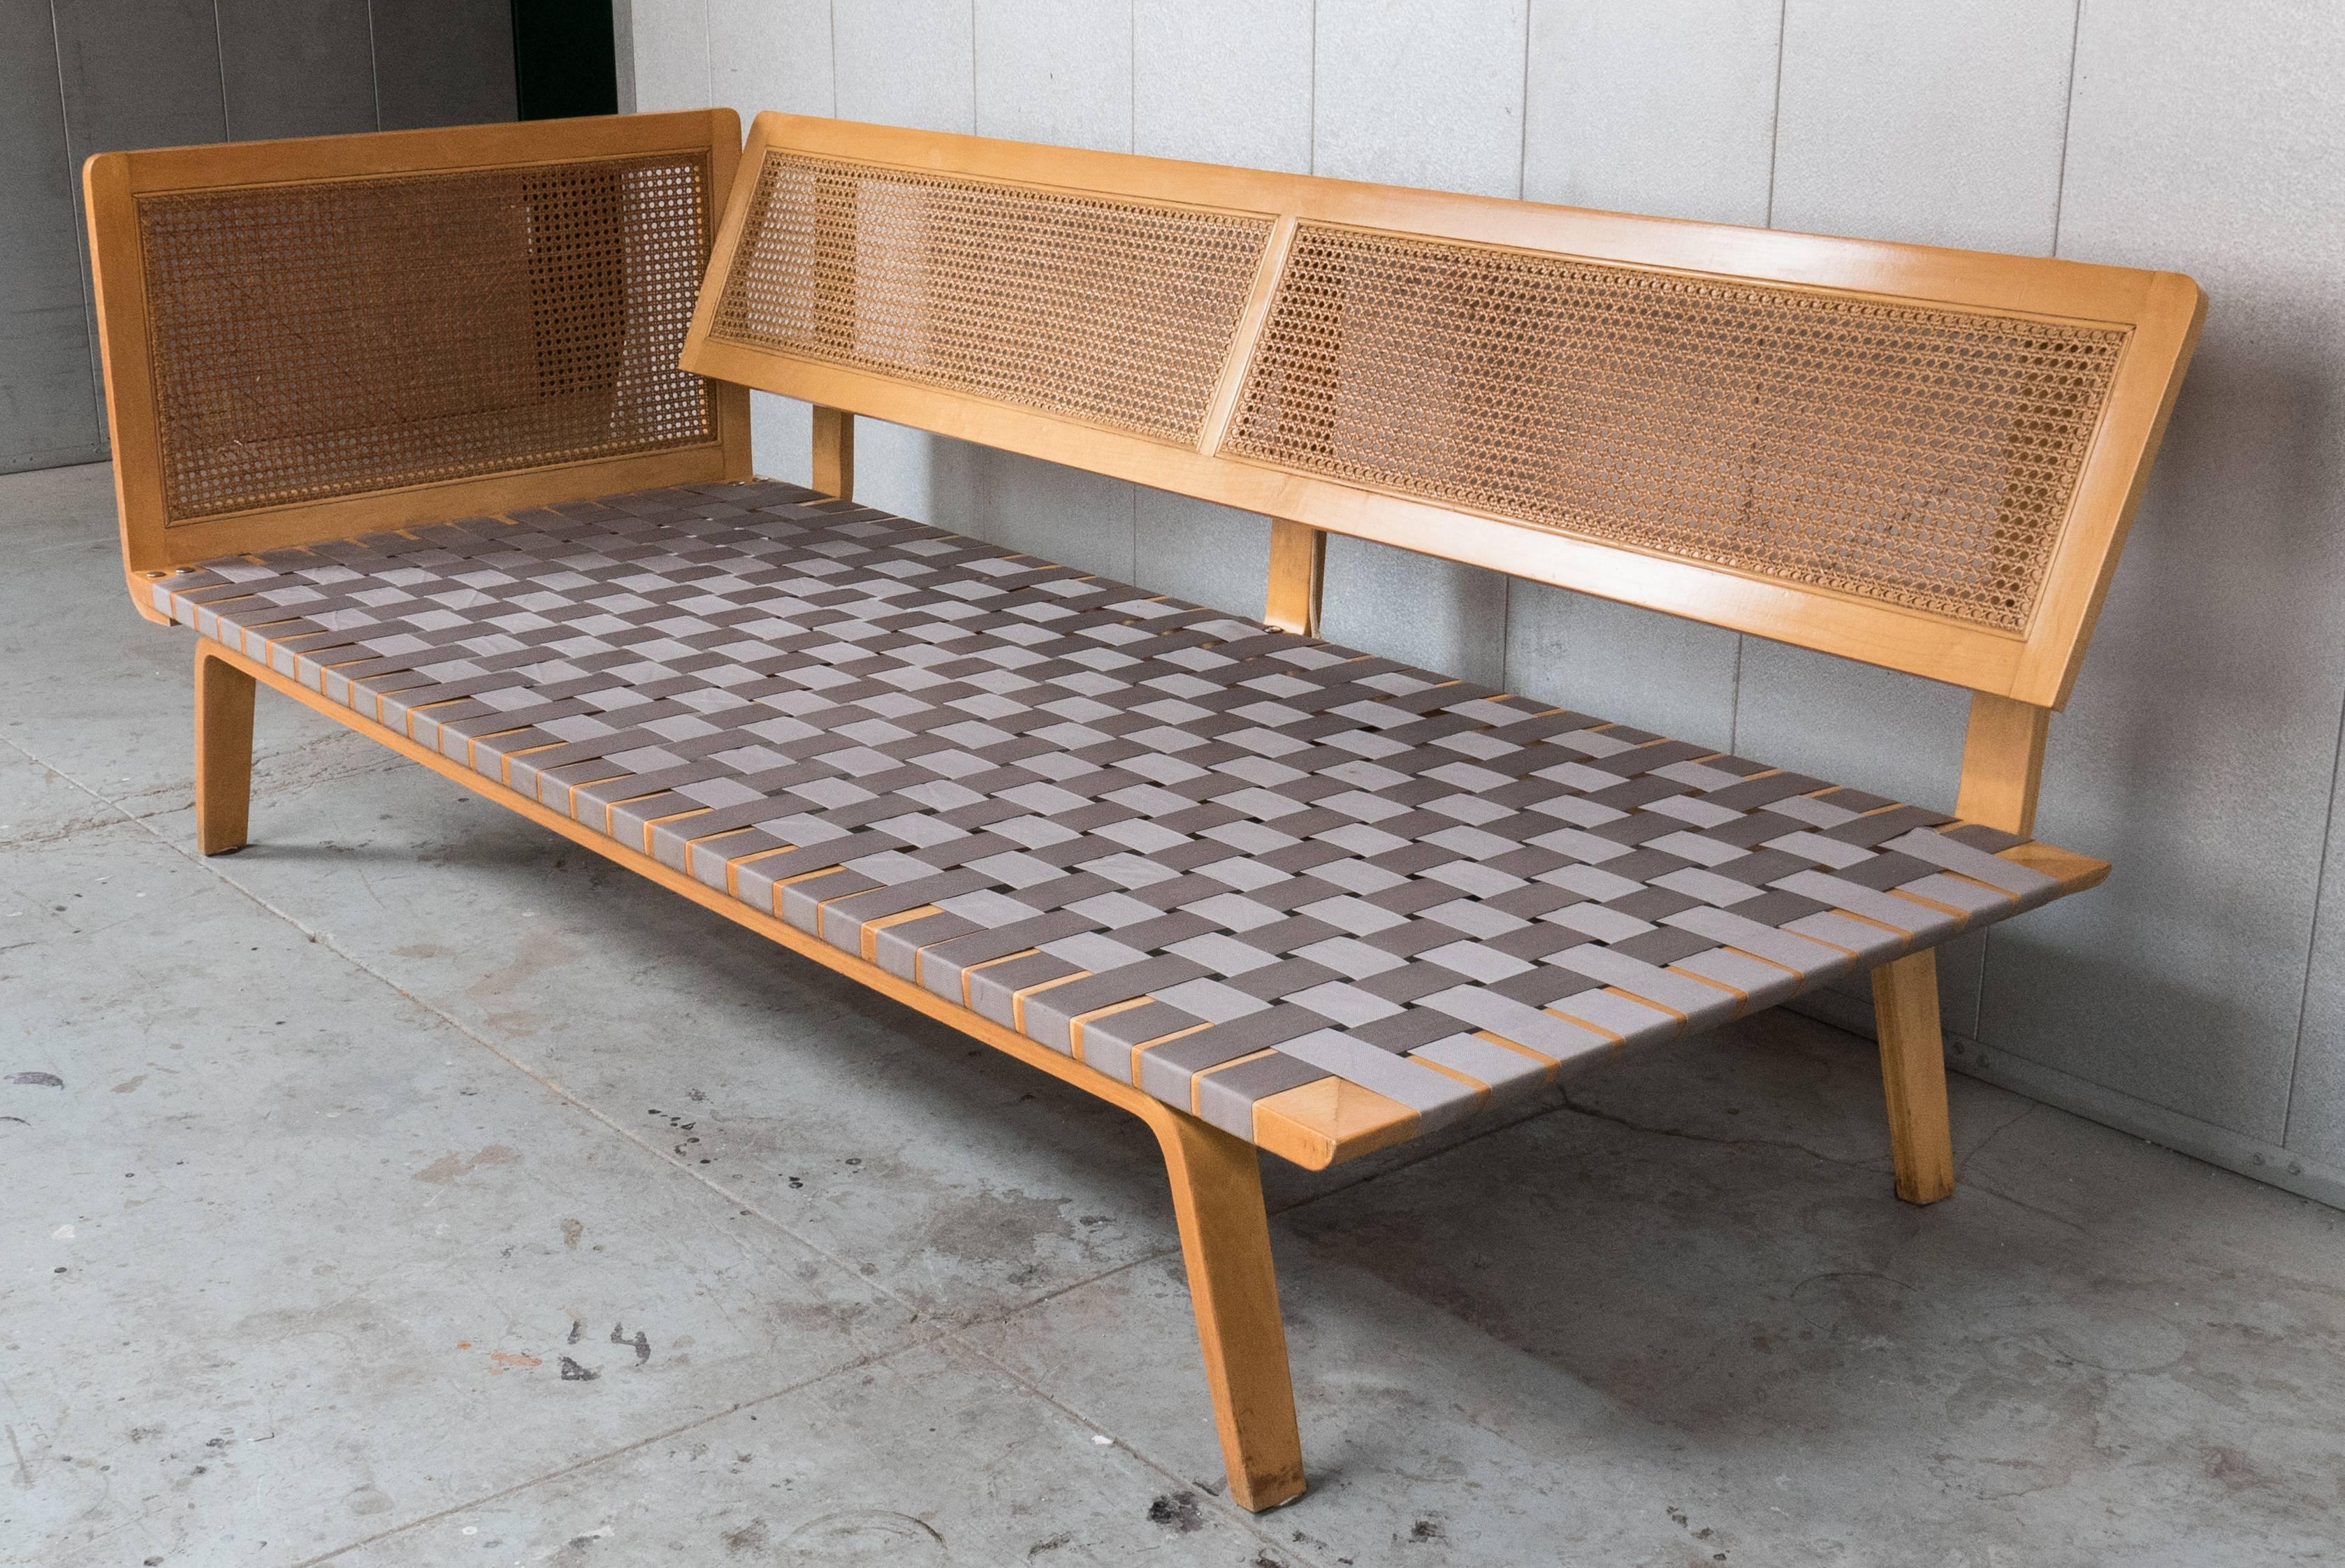 Rare early postwar daybed with birch frame and original webbing and caning. A Clifford Pascoe design for Pascoe Industries, circa 1948. In unusually good original condition, marred only by a few scuffs to the birch and a few small breaks to the